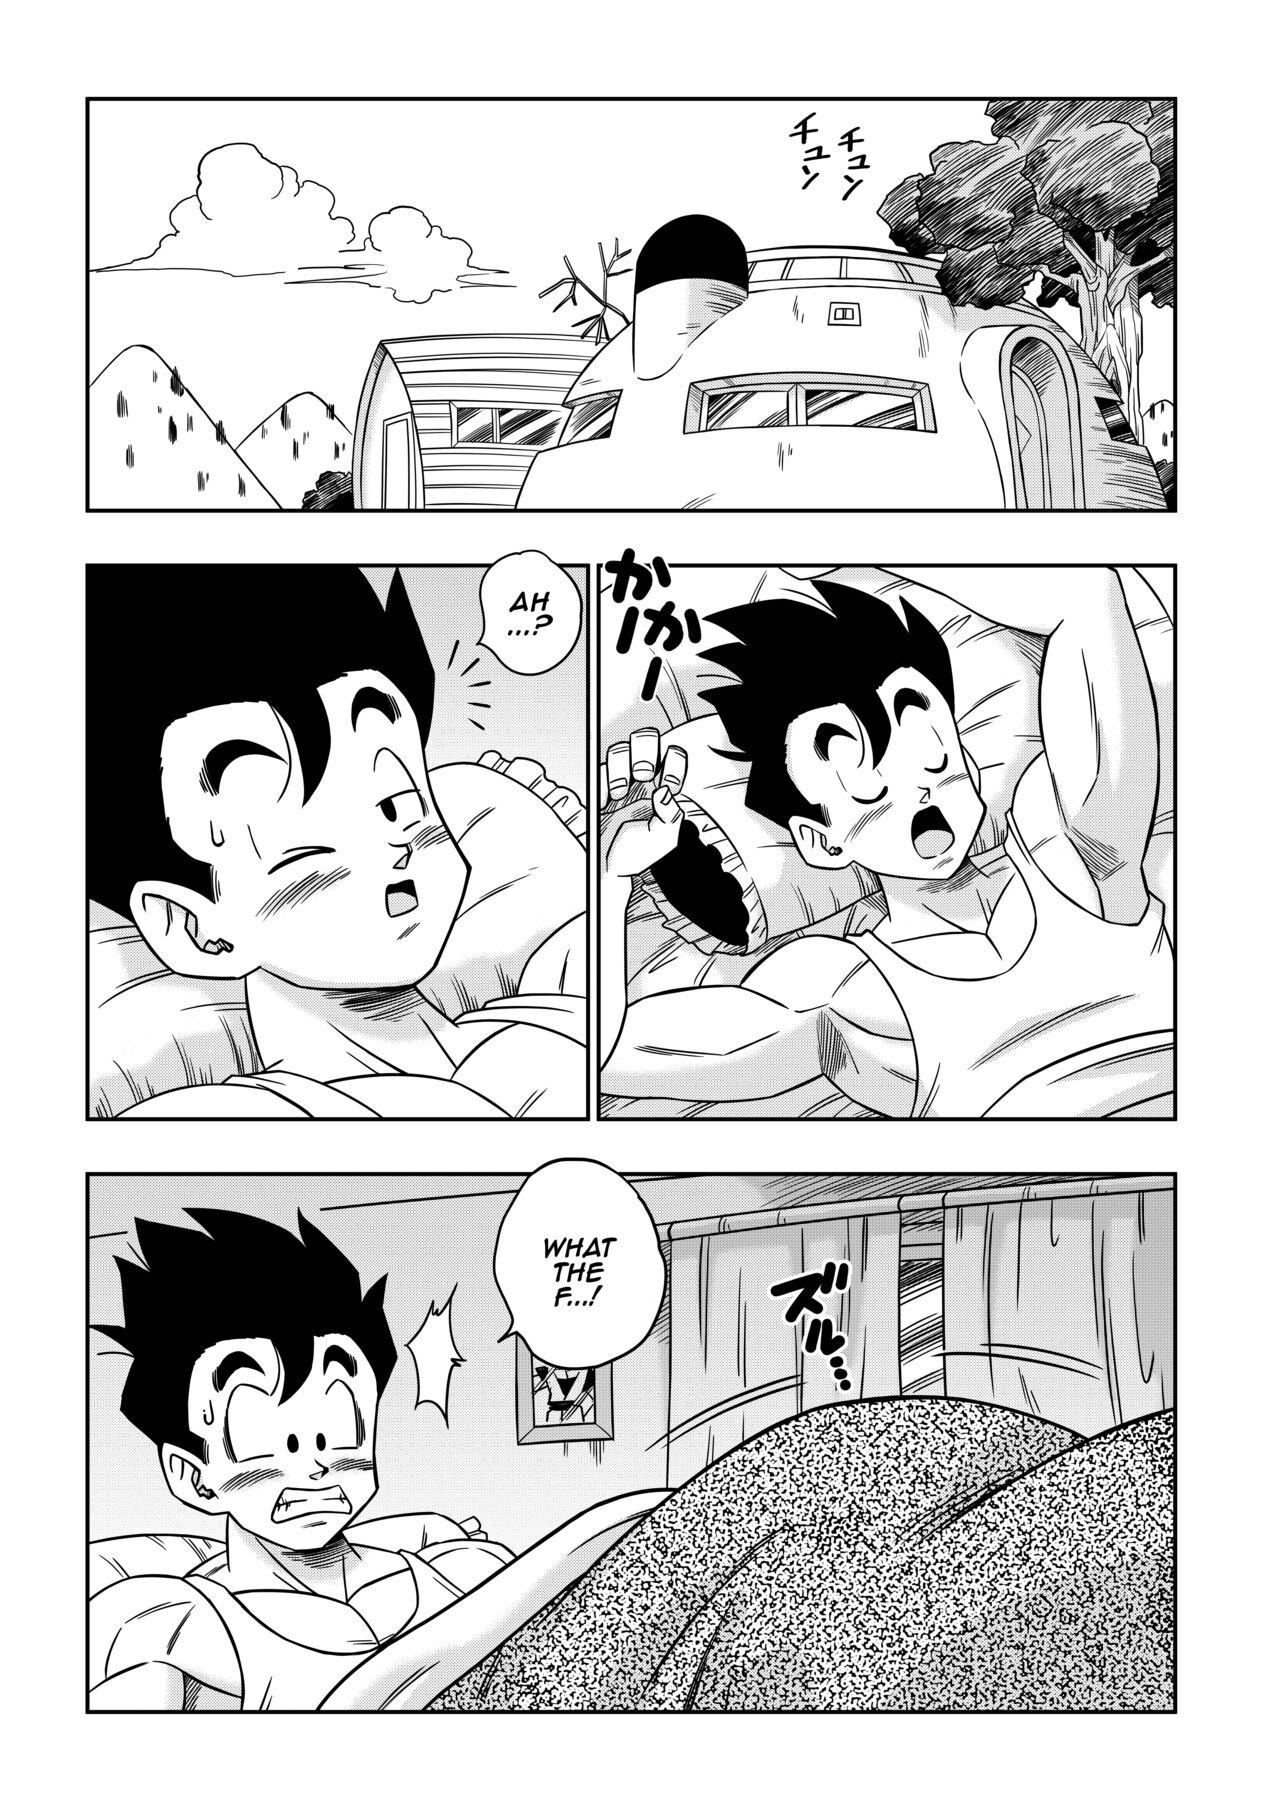 Hidden Cam LOVE TRIANGLE Z PART 5 - Dragon ball z All Natural - Page 3